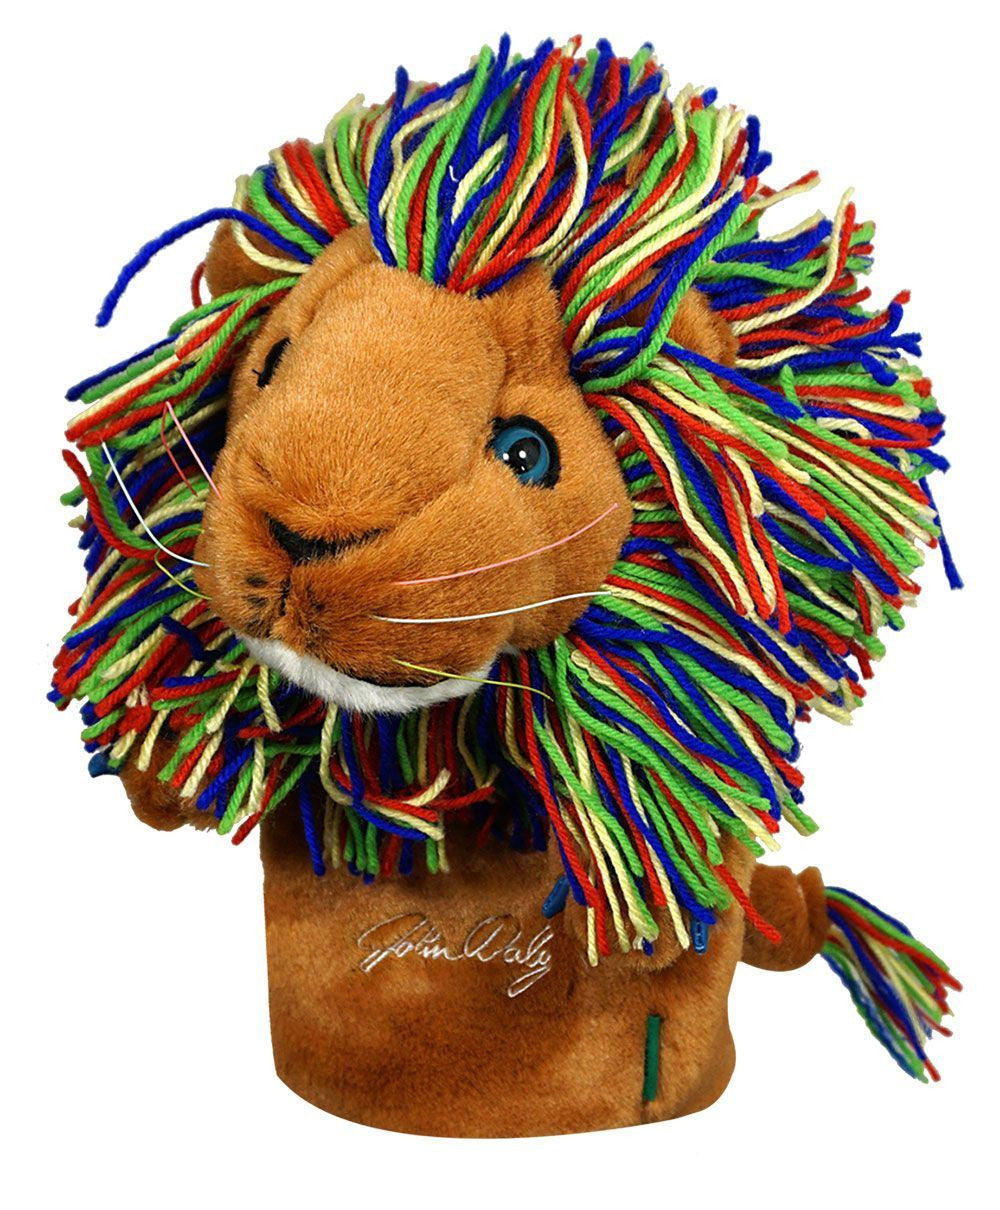 MULTI-COLORED LION DRIVER HEADCOVER - Limited Edition